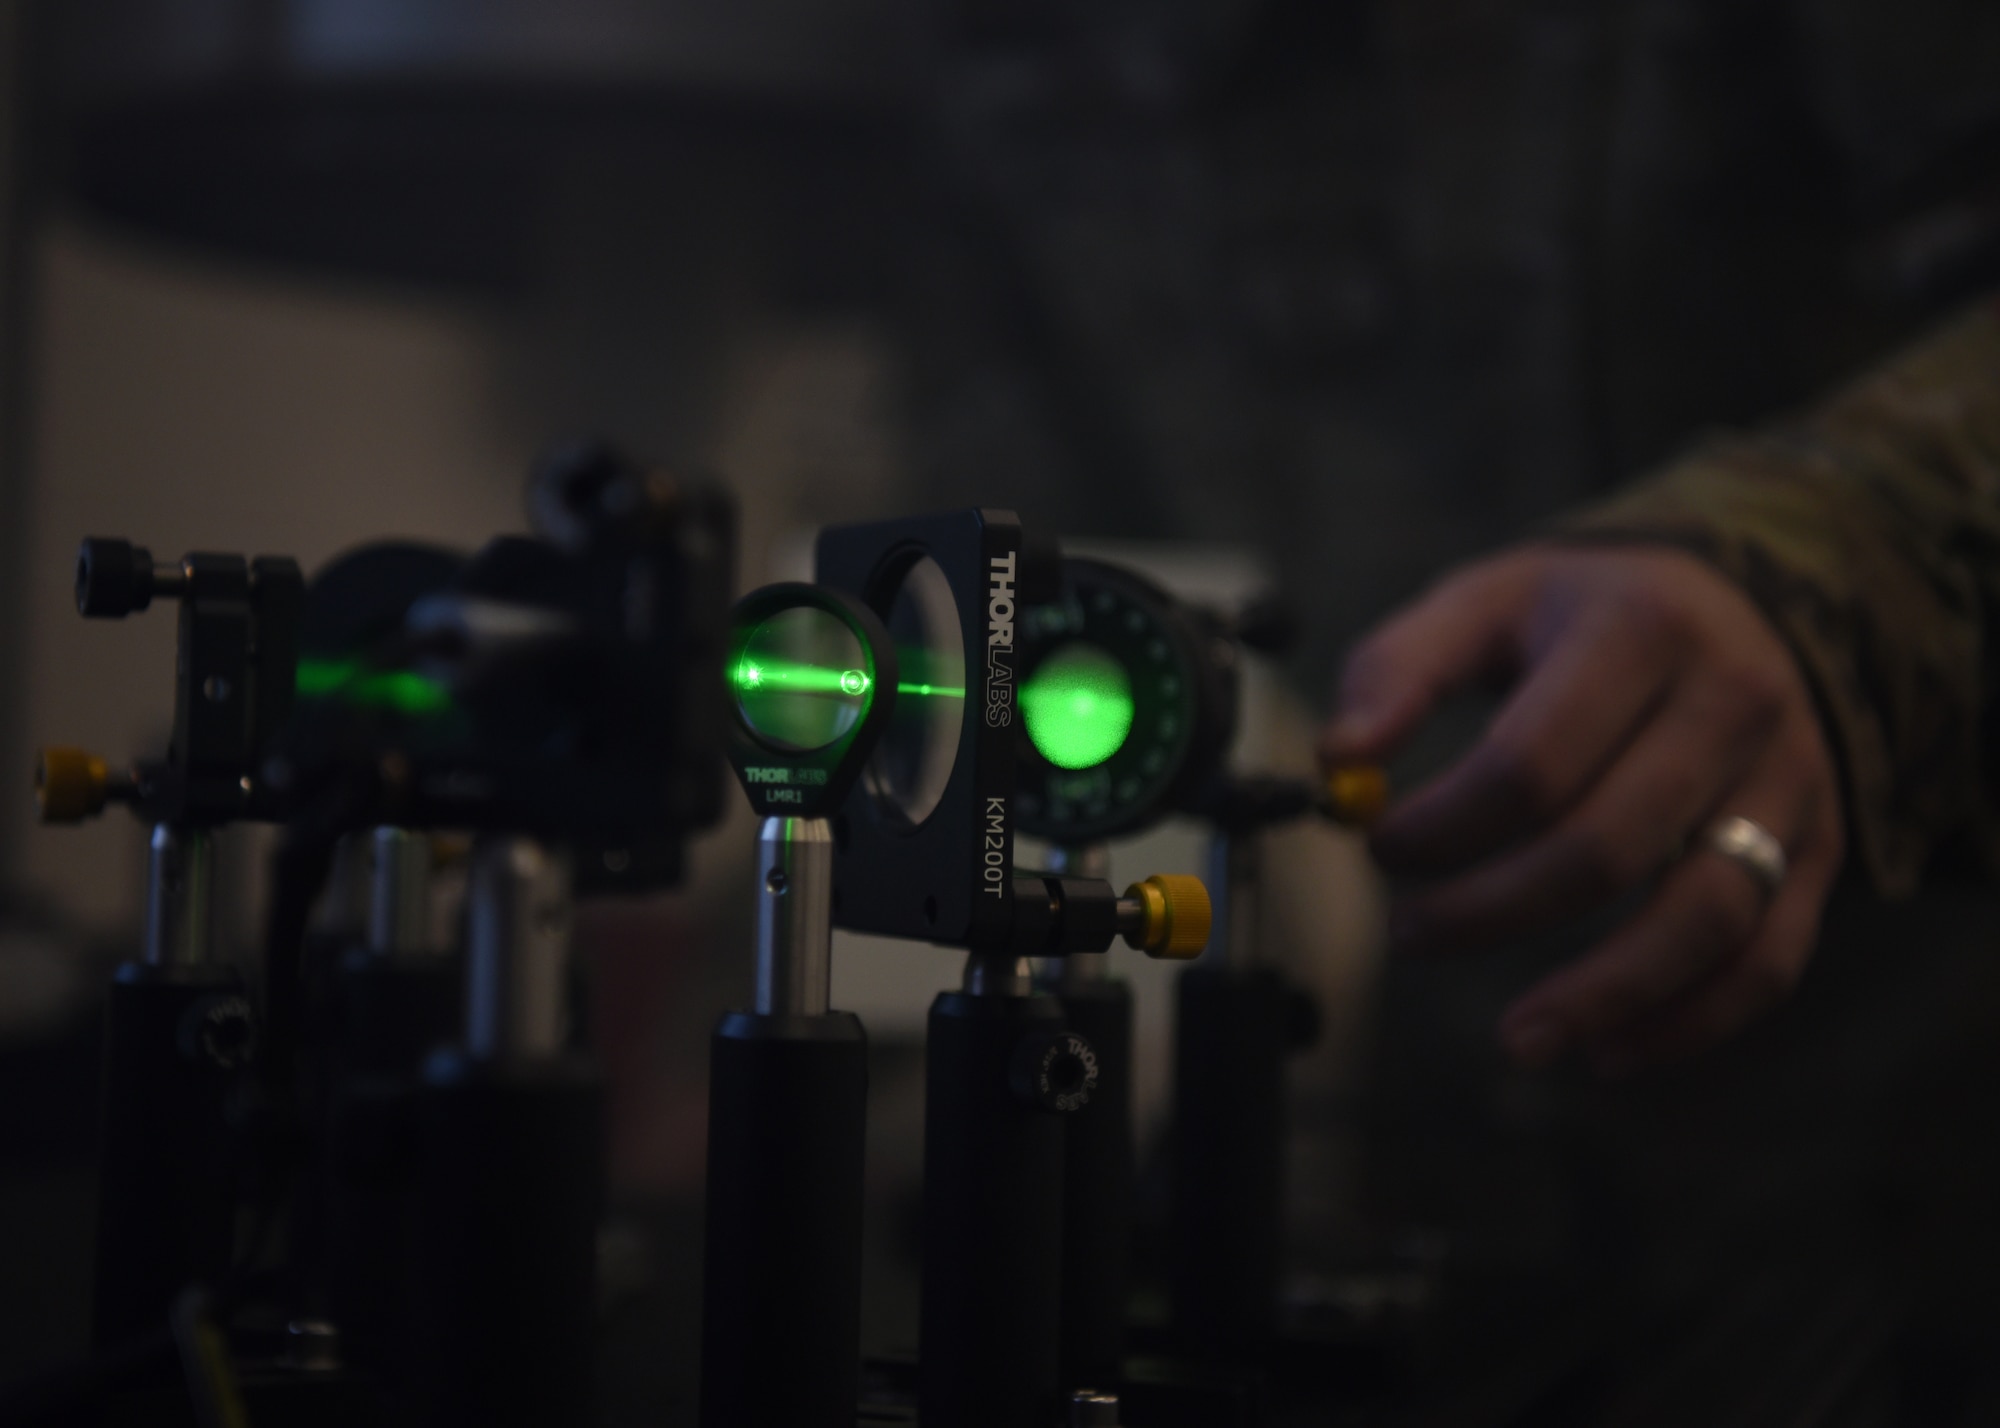 U.S. Air Force Tech. Sgt. David Hunt, 312th Training Squadron Special Instruments Training course instructor, aligns the laser in the interferometer to demonstrate light technologies for the SPINSTRA students, inside the Louis F. Garland Department of Defense Fire Academy on Goodfellow Air Force Base, Texas, Aug. 19, 2020. Hunt demonstrated how light photons could act like either a wave or a particle, known as the duality of light. (U.S. Air Force photo by Senior Airman Abbey Rieves)